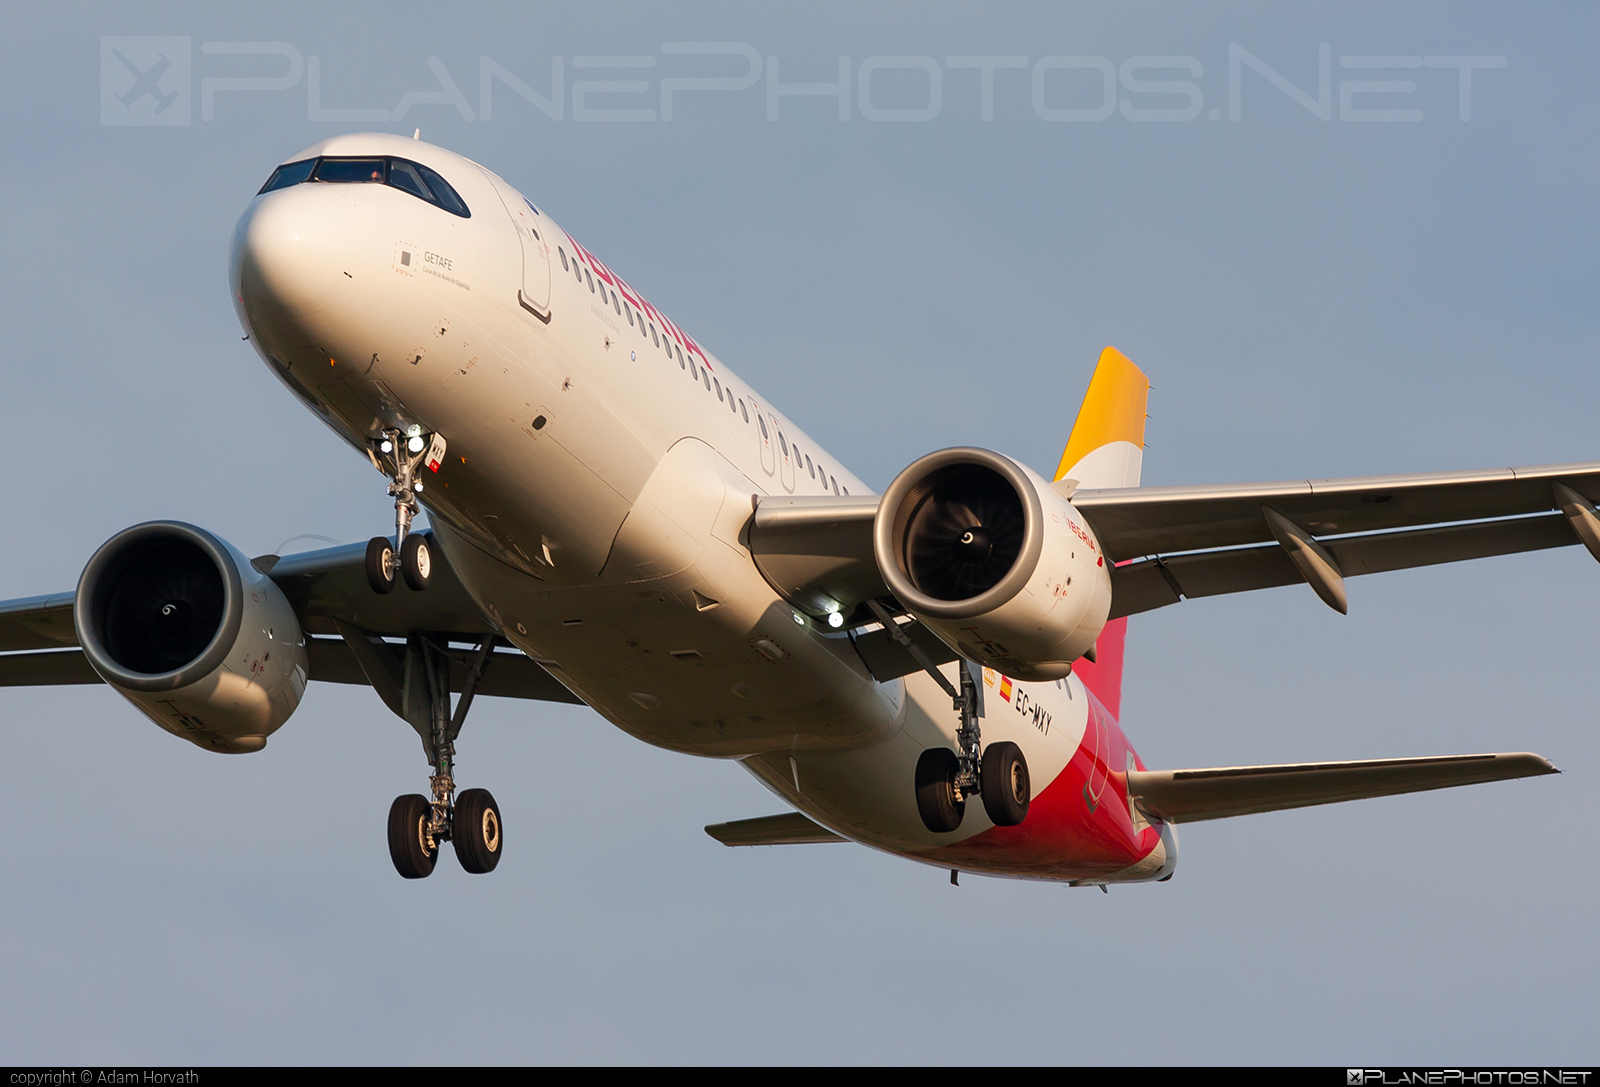 Airbus A320-251N - EC-MXY operated by Iberia #a320 #a320family #a320neo #airbus #airbus320 #iberia